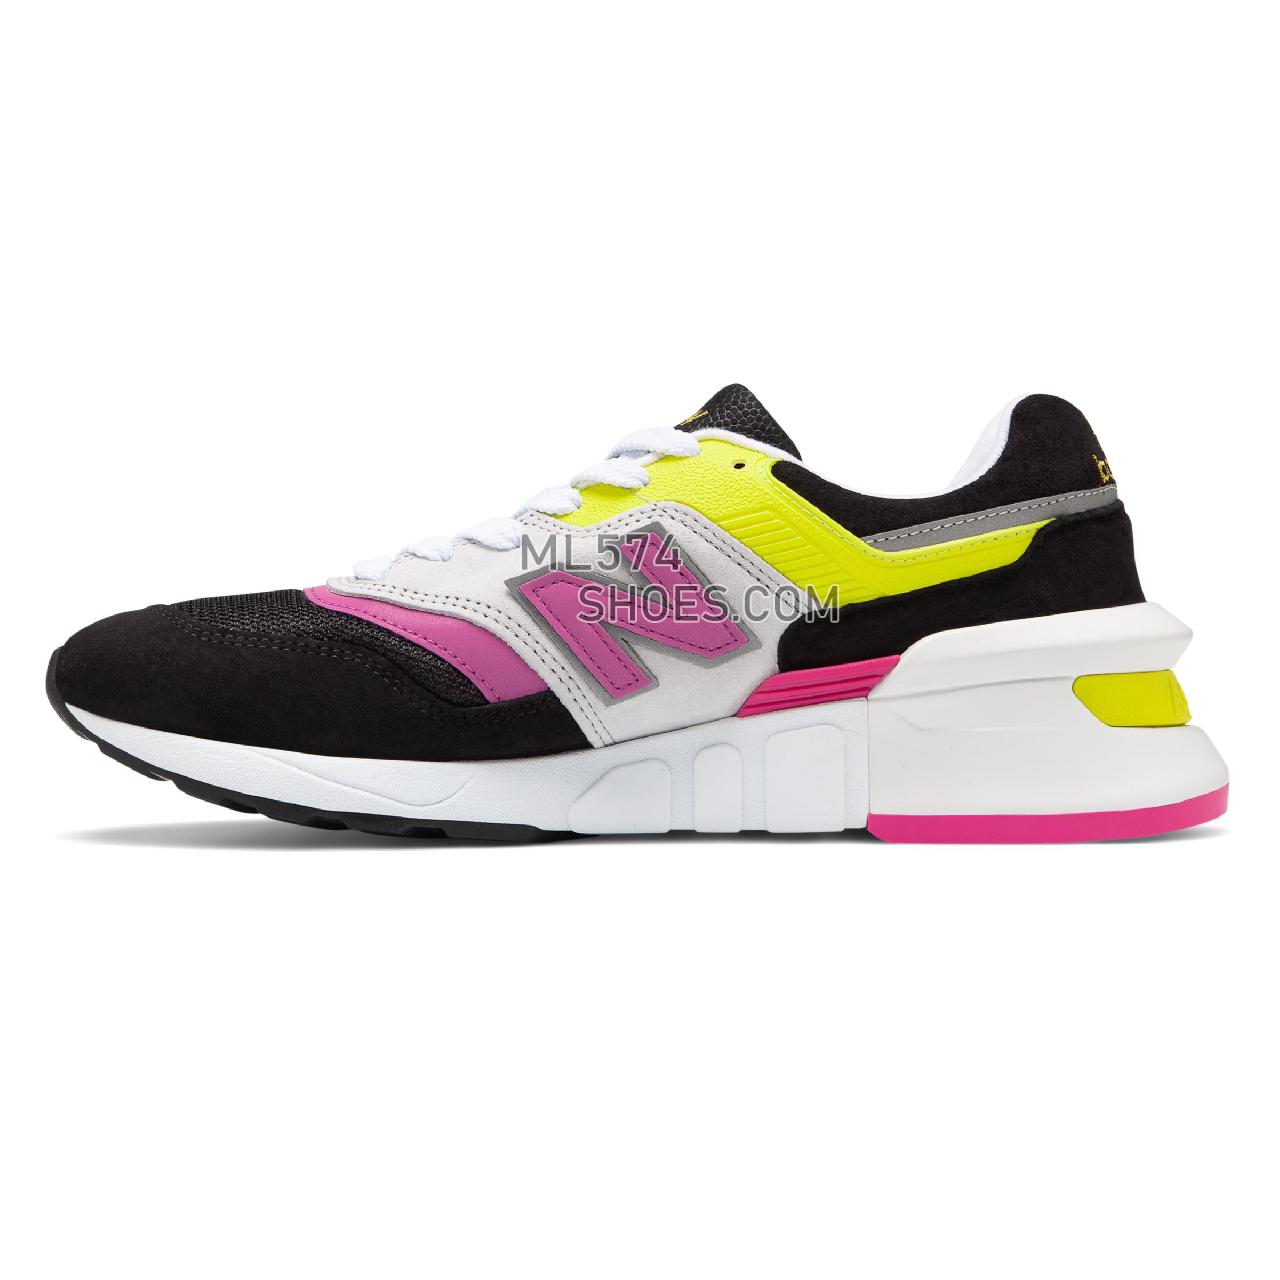 New Balance Made in US 997 Sport - Men's Made in US 997 Sport Classic - Black with Yellow - M997SKP